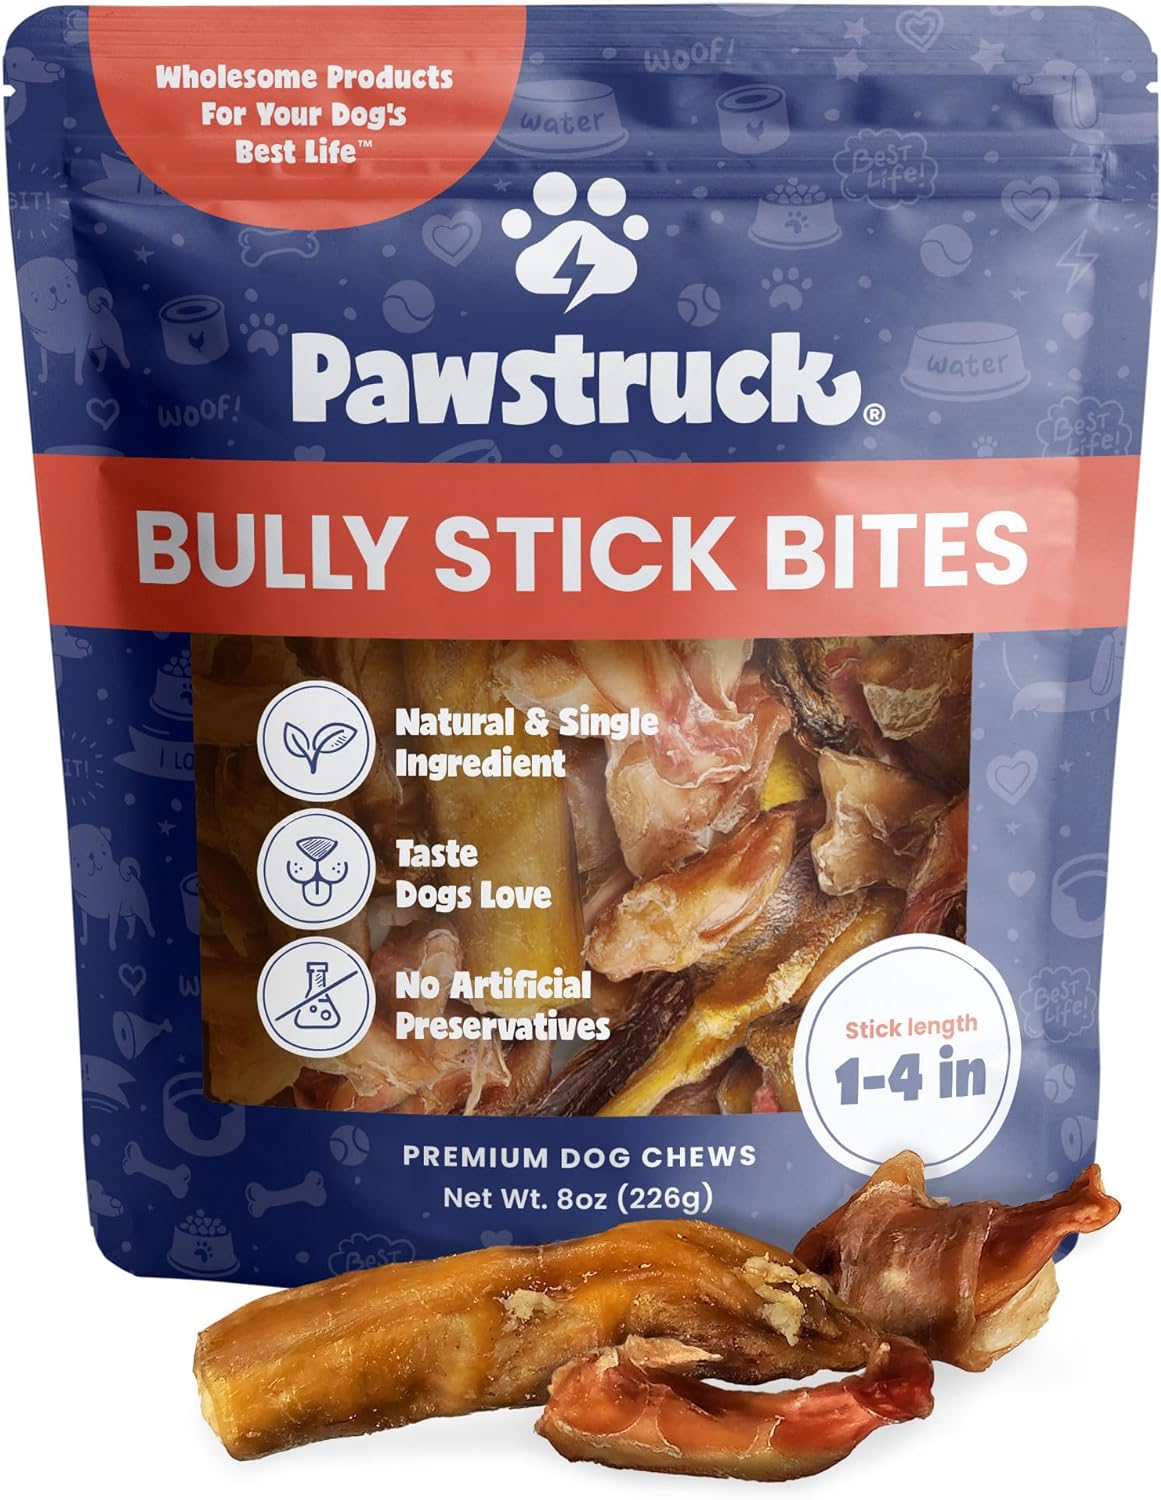 Pawstruck Natural 1-4" Bully Stick Bites for Small Dogs & Puppies – Single Ingredient Digestible Rawhide Free Alternative - High Protein Chew Treat Bones - 8 oz Bag - Packaging May Vary